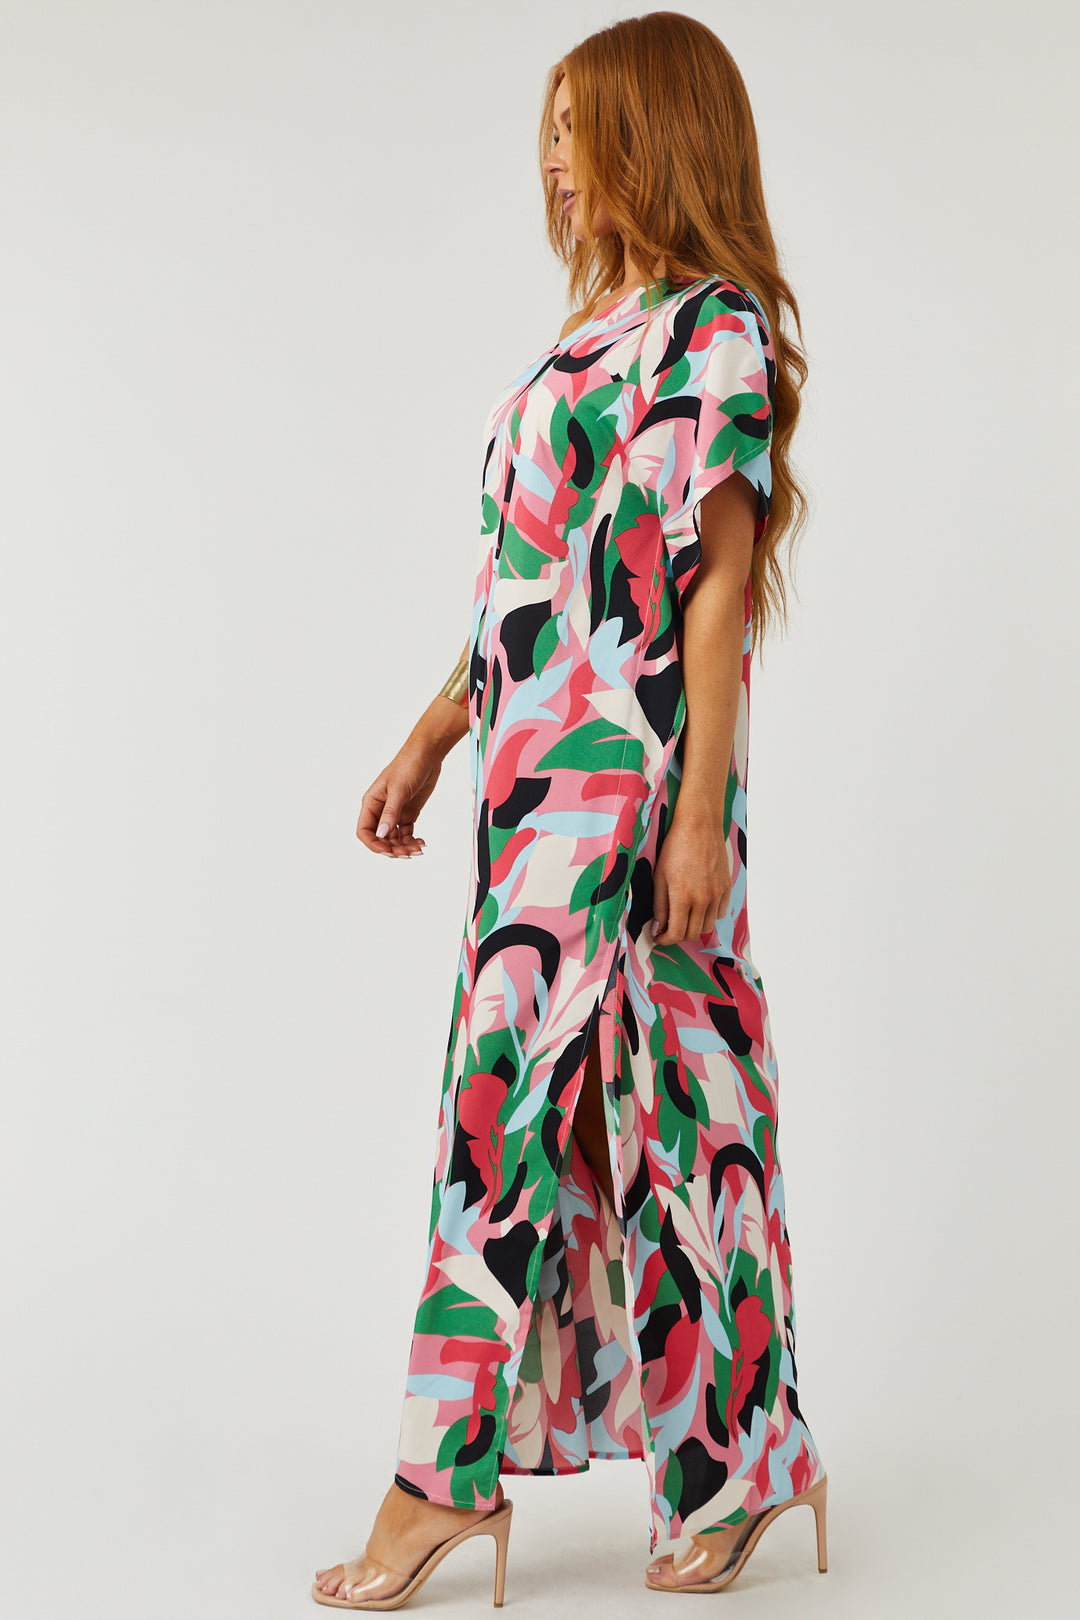 Hot Pink Abstract Print One Shoulder Maxi Dress & Lime Lush